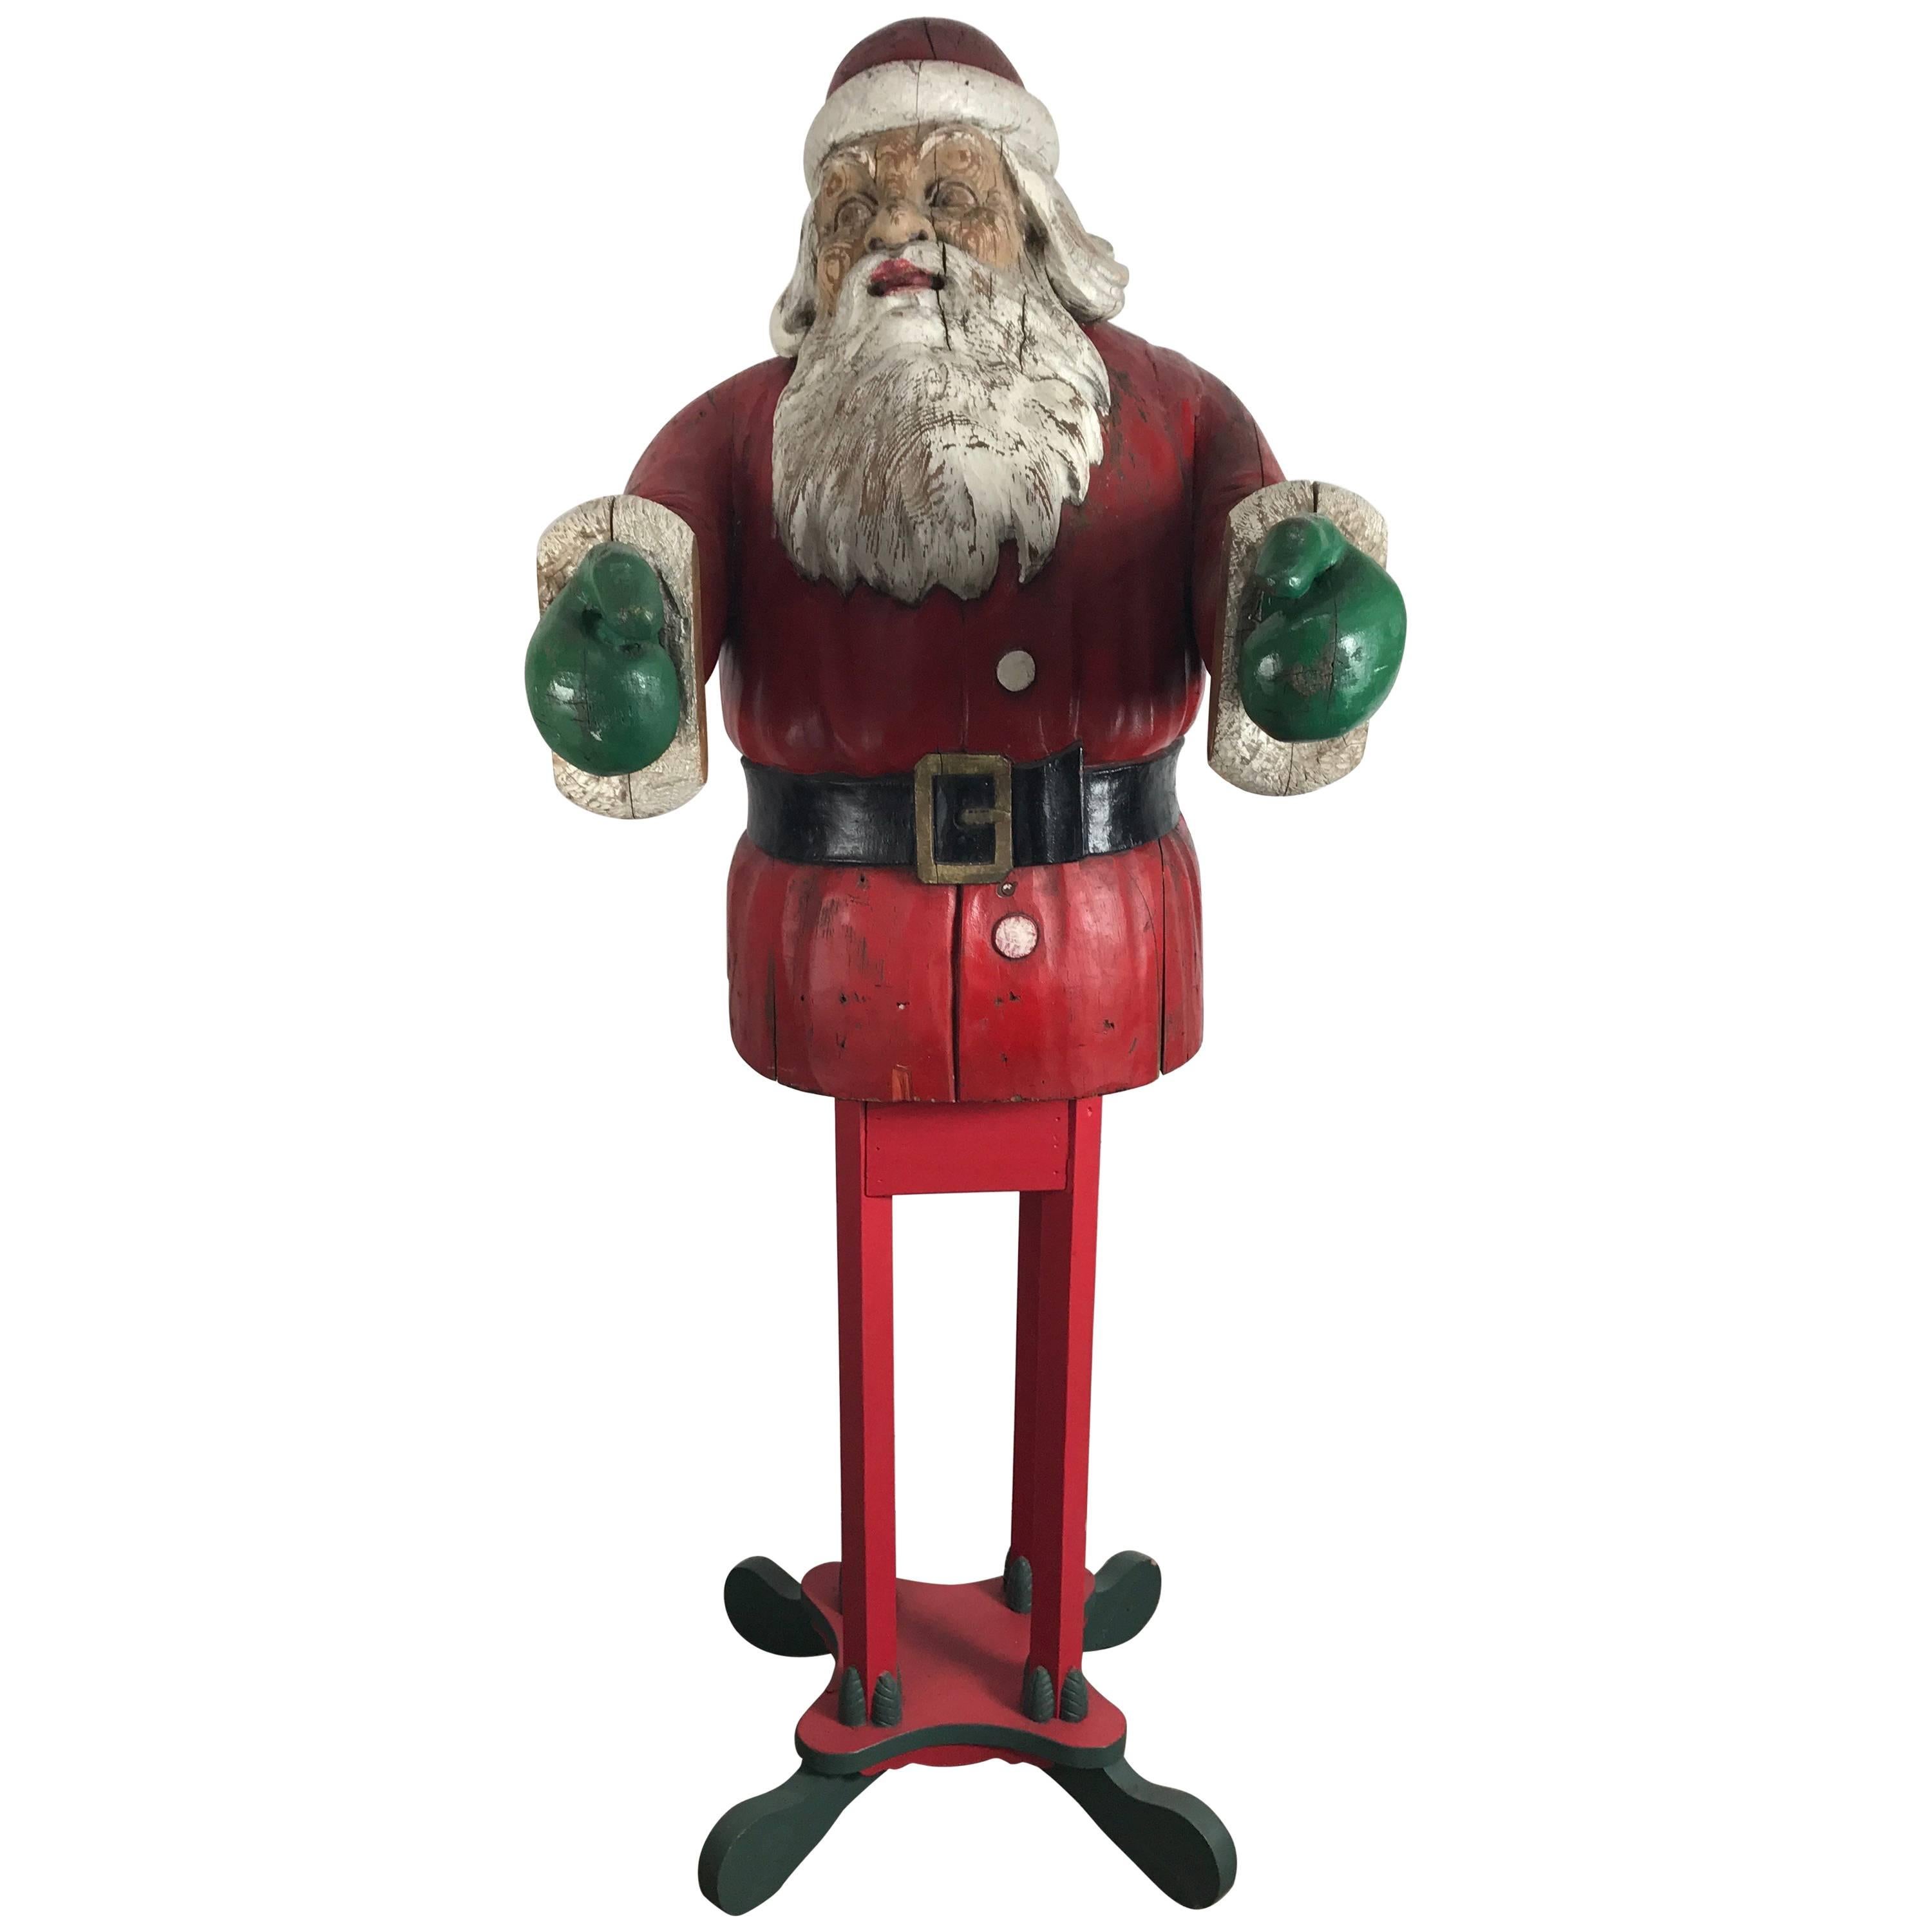 Turn of the Century Life Size Carved Wood and Painted Folk Art Santa Sculpture